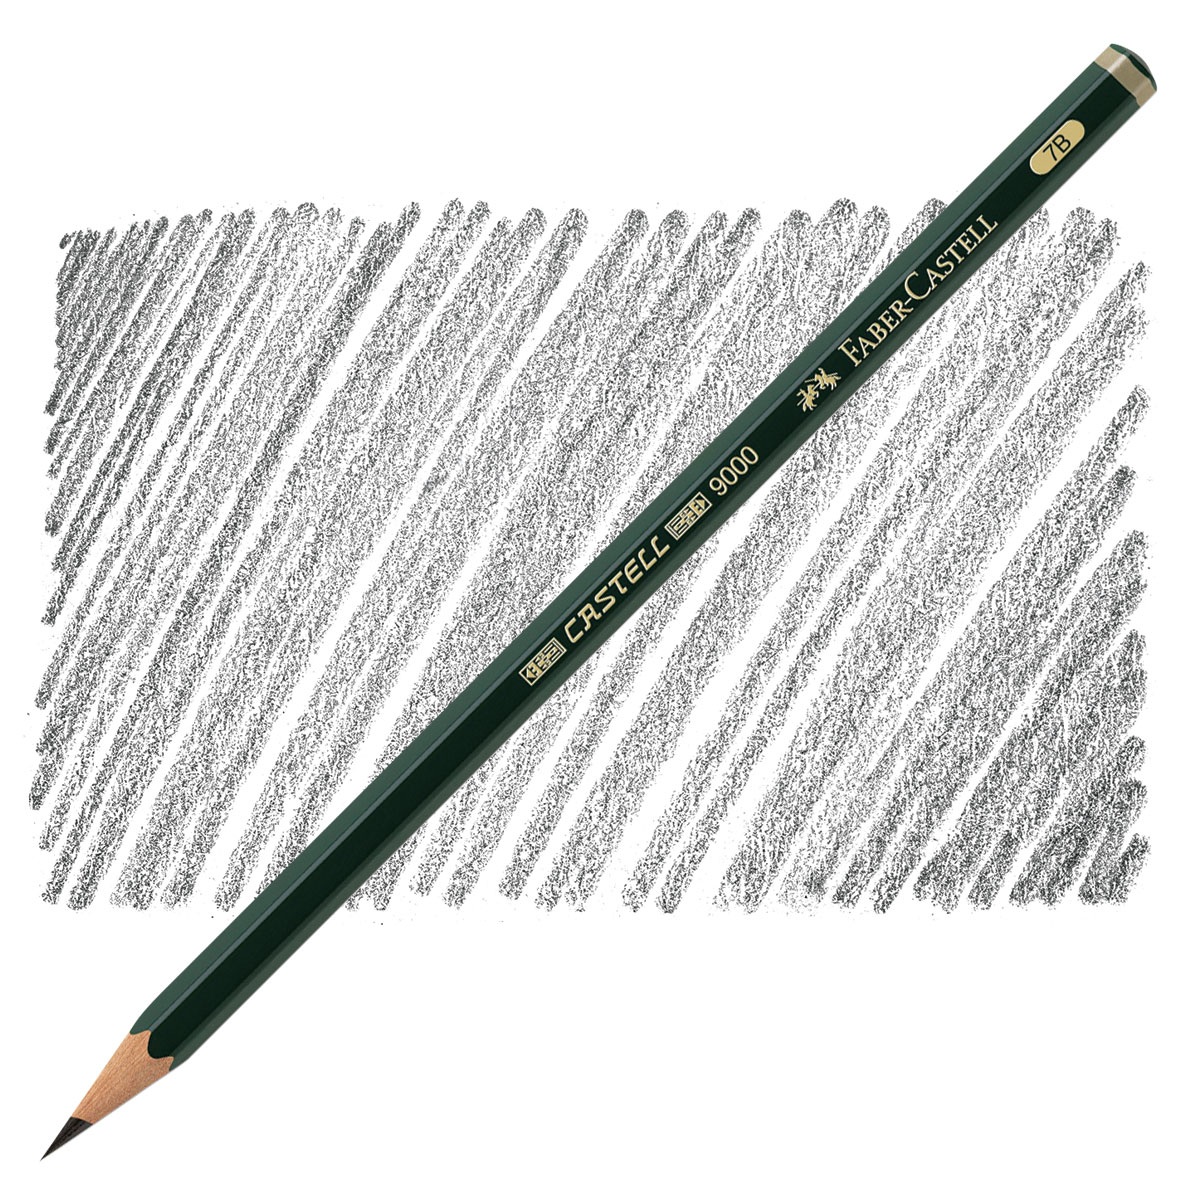 Faber-Castell Pencils, Castell 9000 Art Graphite Pencils, HB No.2 Pencil for Drawing, Writing, Sketch, Shading, Artist, School Supplies Pencils - 12